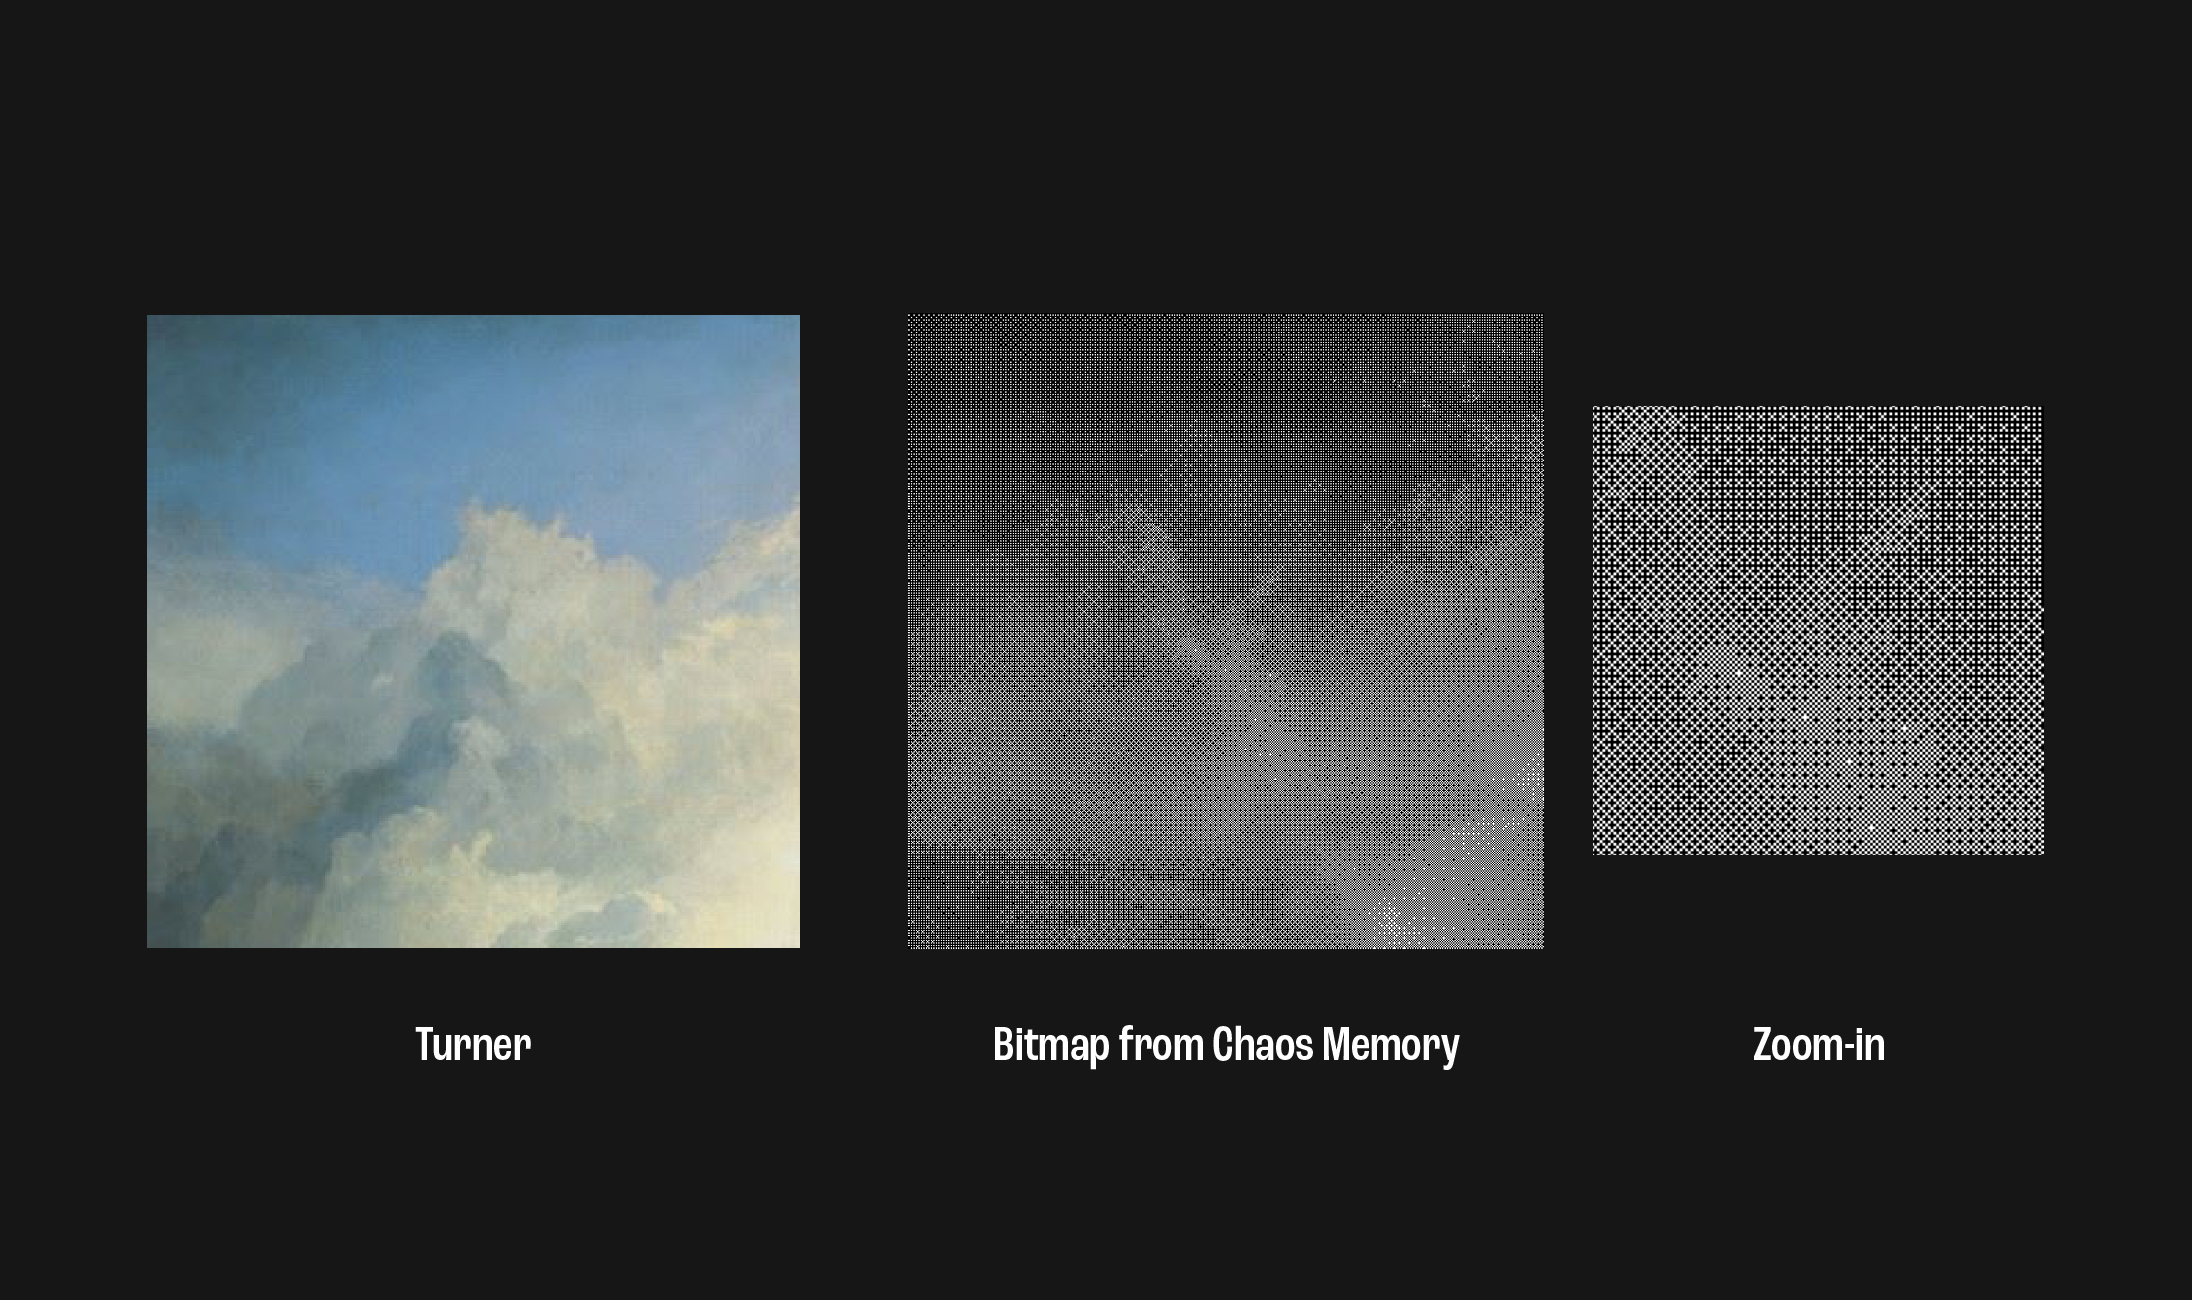 Comparison of Turner's work with Chaos Memory bitmap files